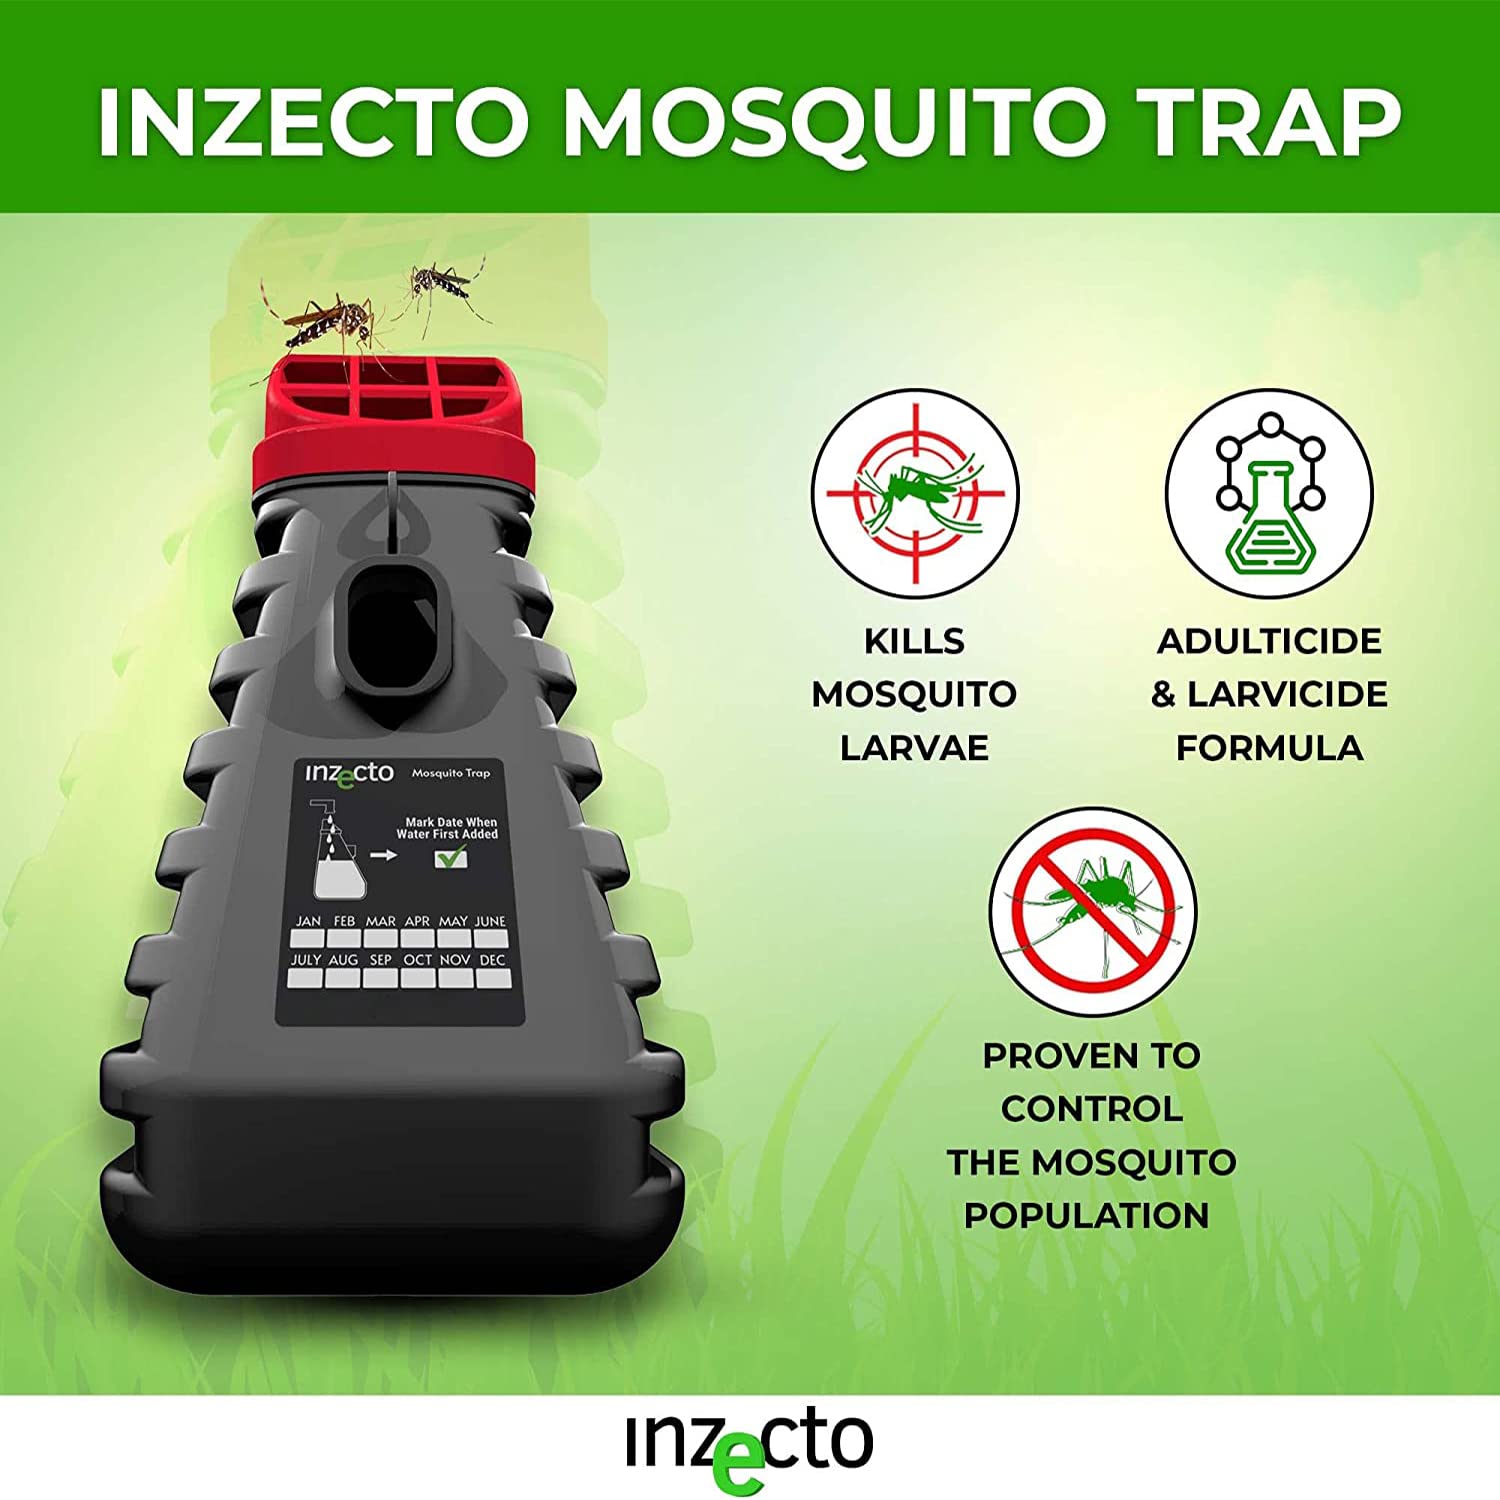 INZECTO Mosquito Trap - Device to Effectively Attract Mosquitoes and Kill Larvae - Revolutionary Outdoor Mosquito Solution Simply Activated by Water (1 Trap)